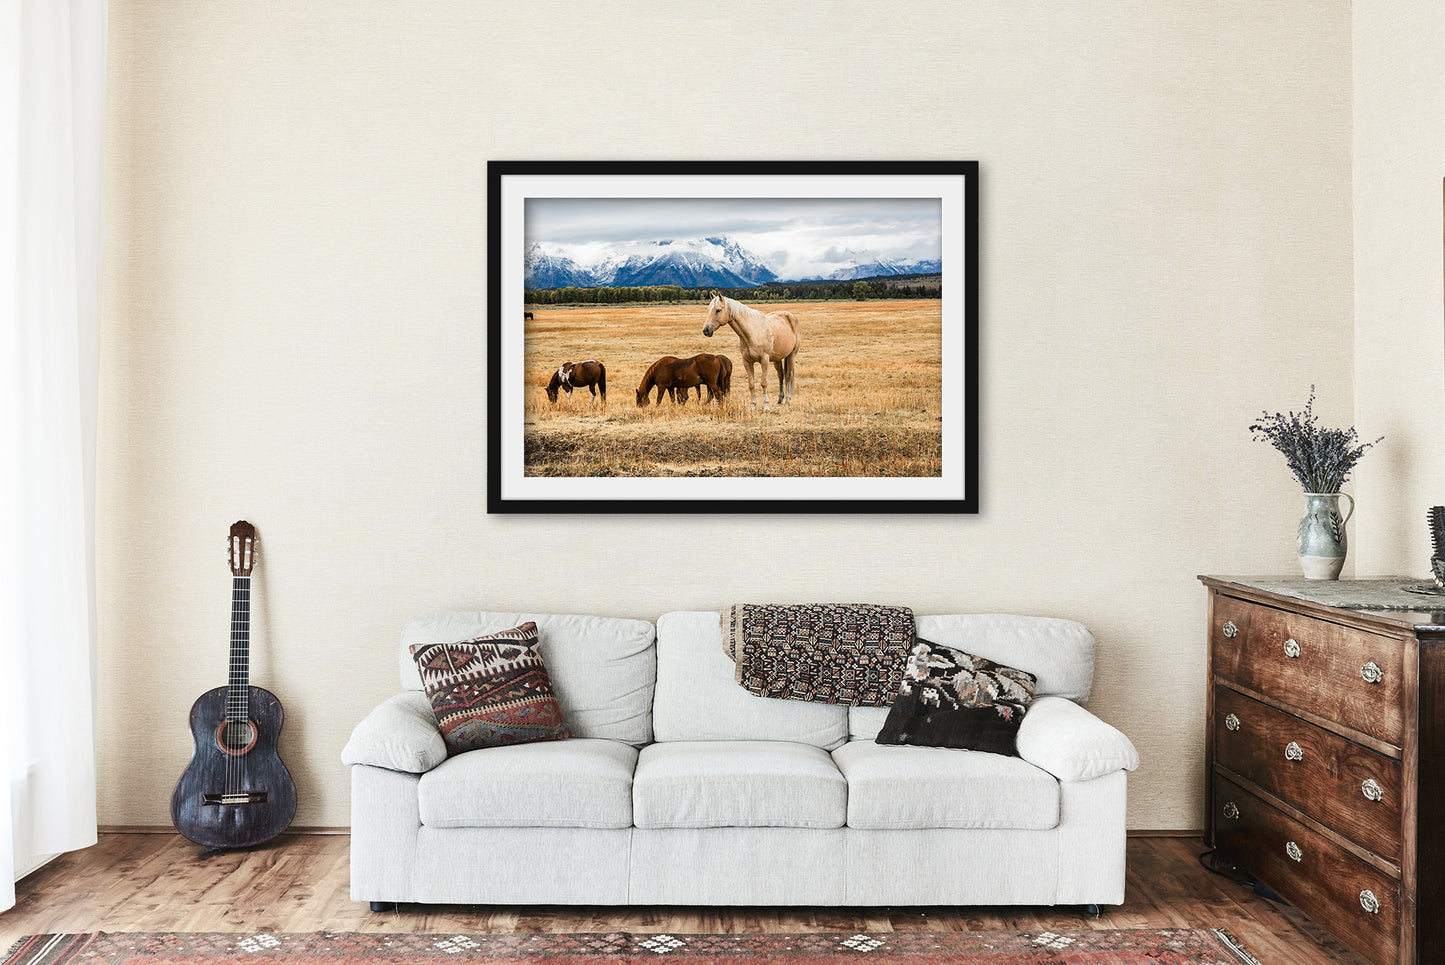 Framed and Matted Print - Picture of Palomino Horse on Autumn Day in Grand Teton National Park Wyoming - Ready to Hang Equine Wall Art Decor